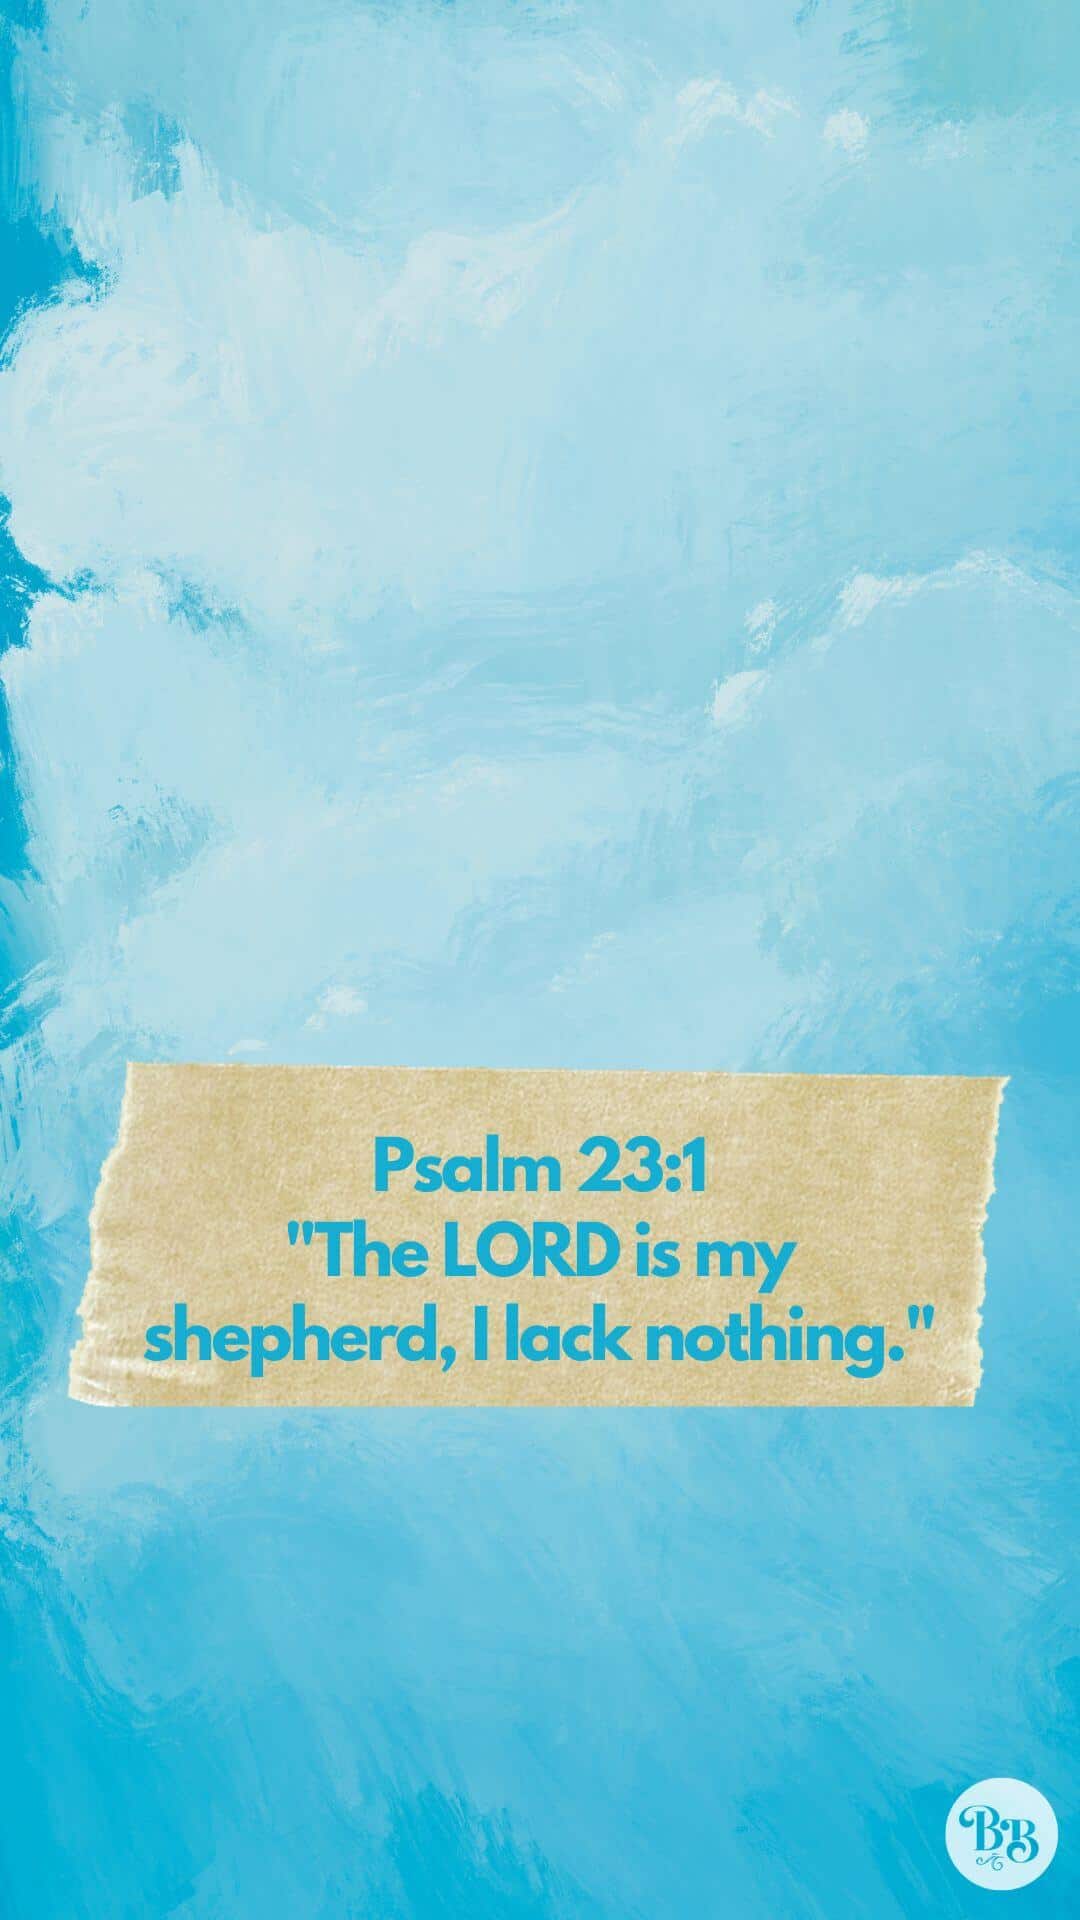 Inspiring Christian Wallpaper & Bible Verse Background For Your Phone